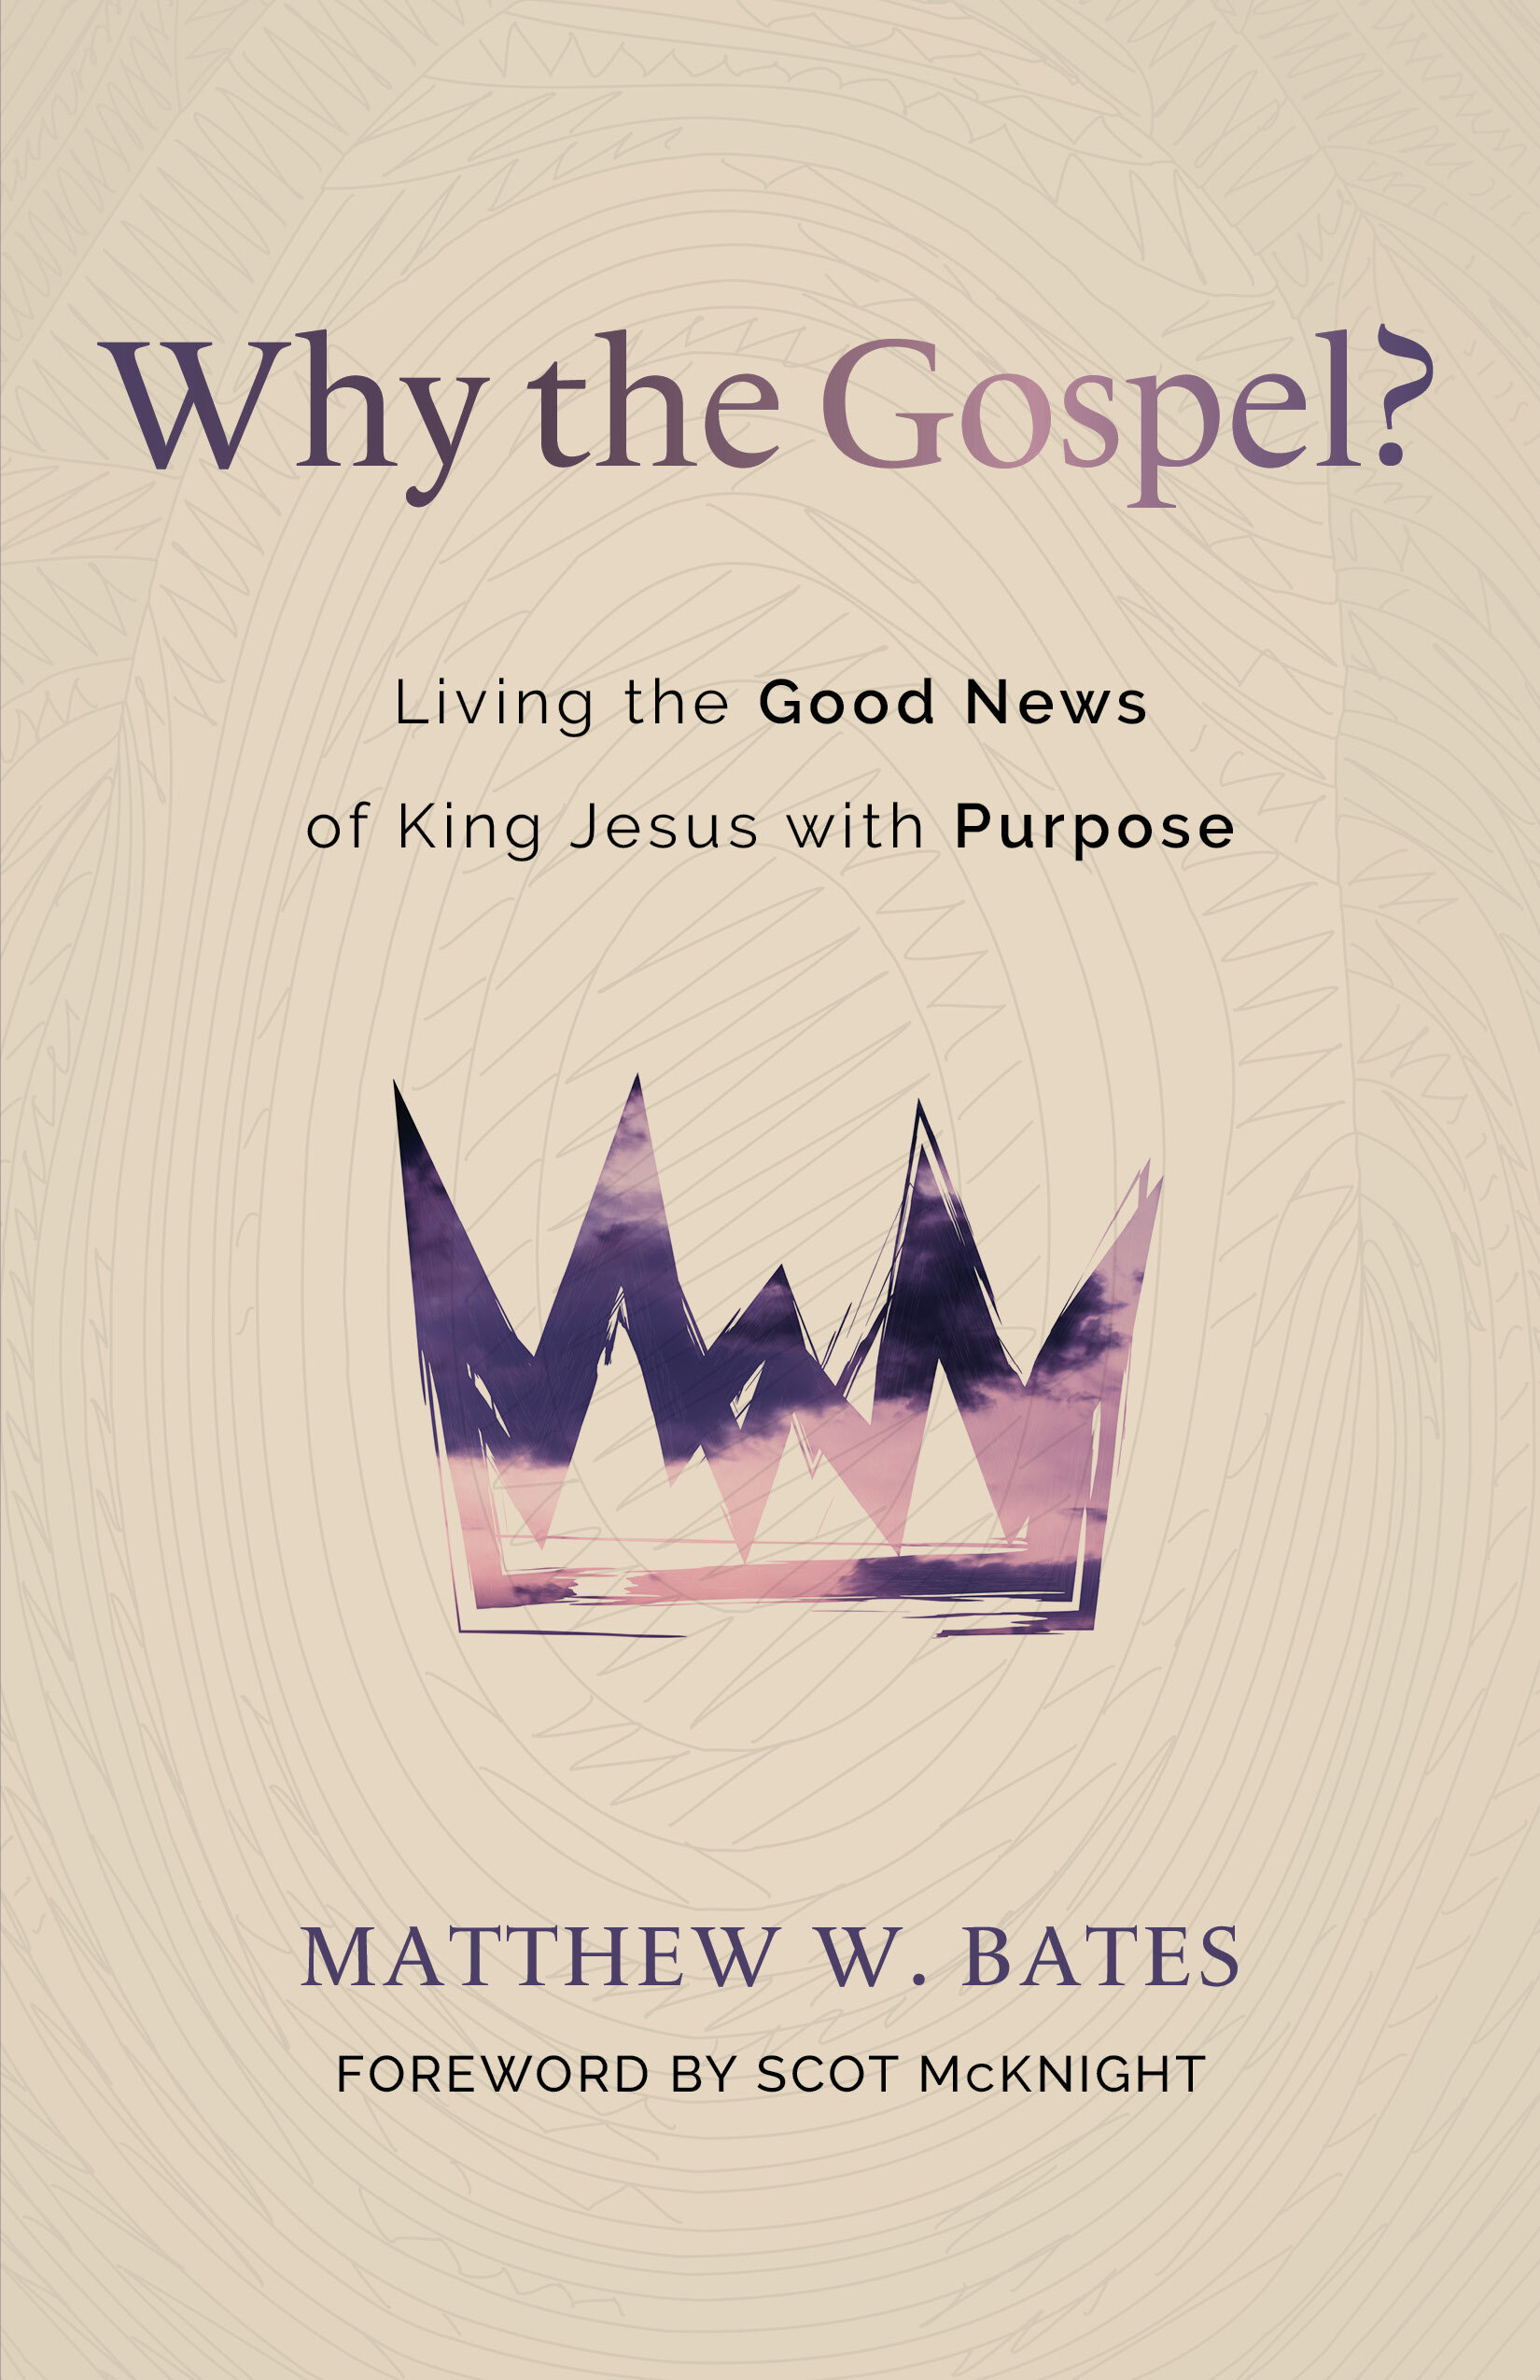 Why the Gospel? Living the Good News of King Jesus with Purpose